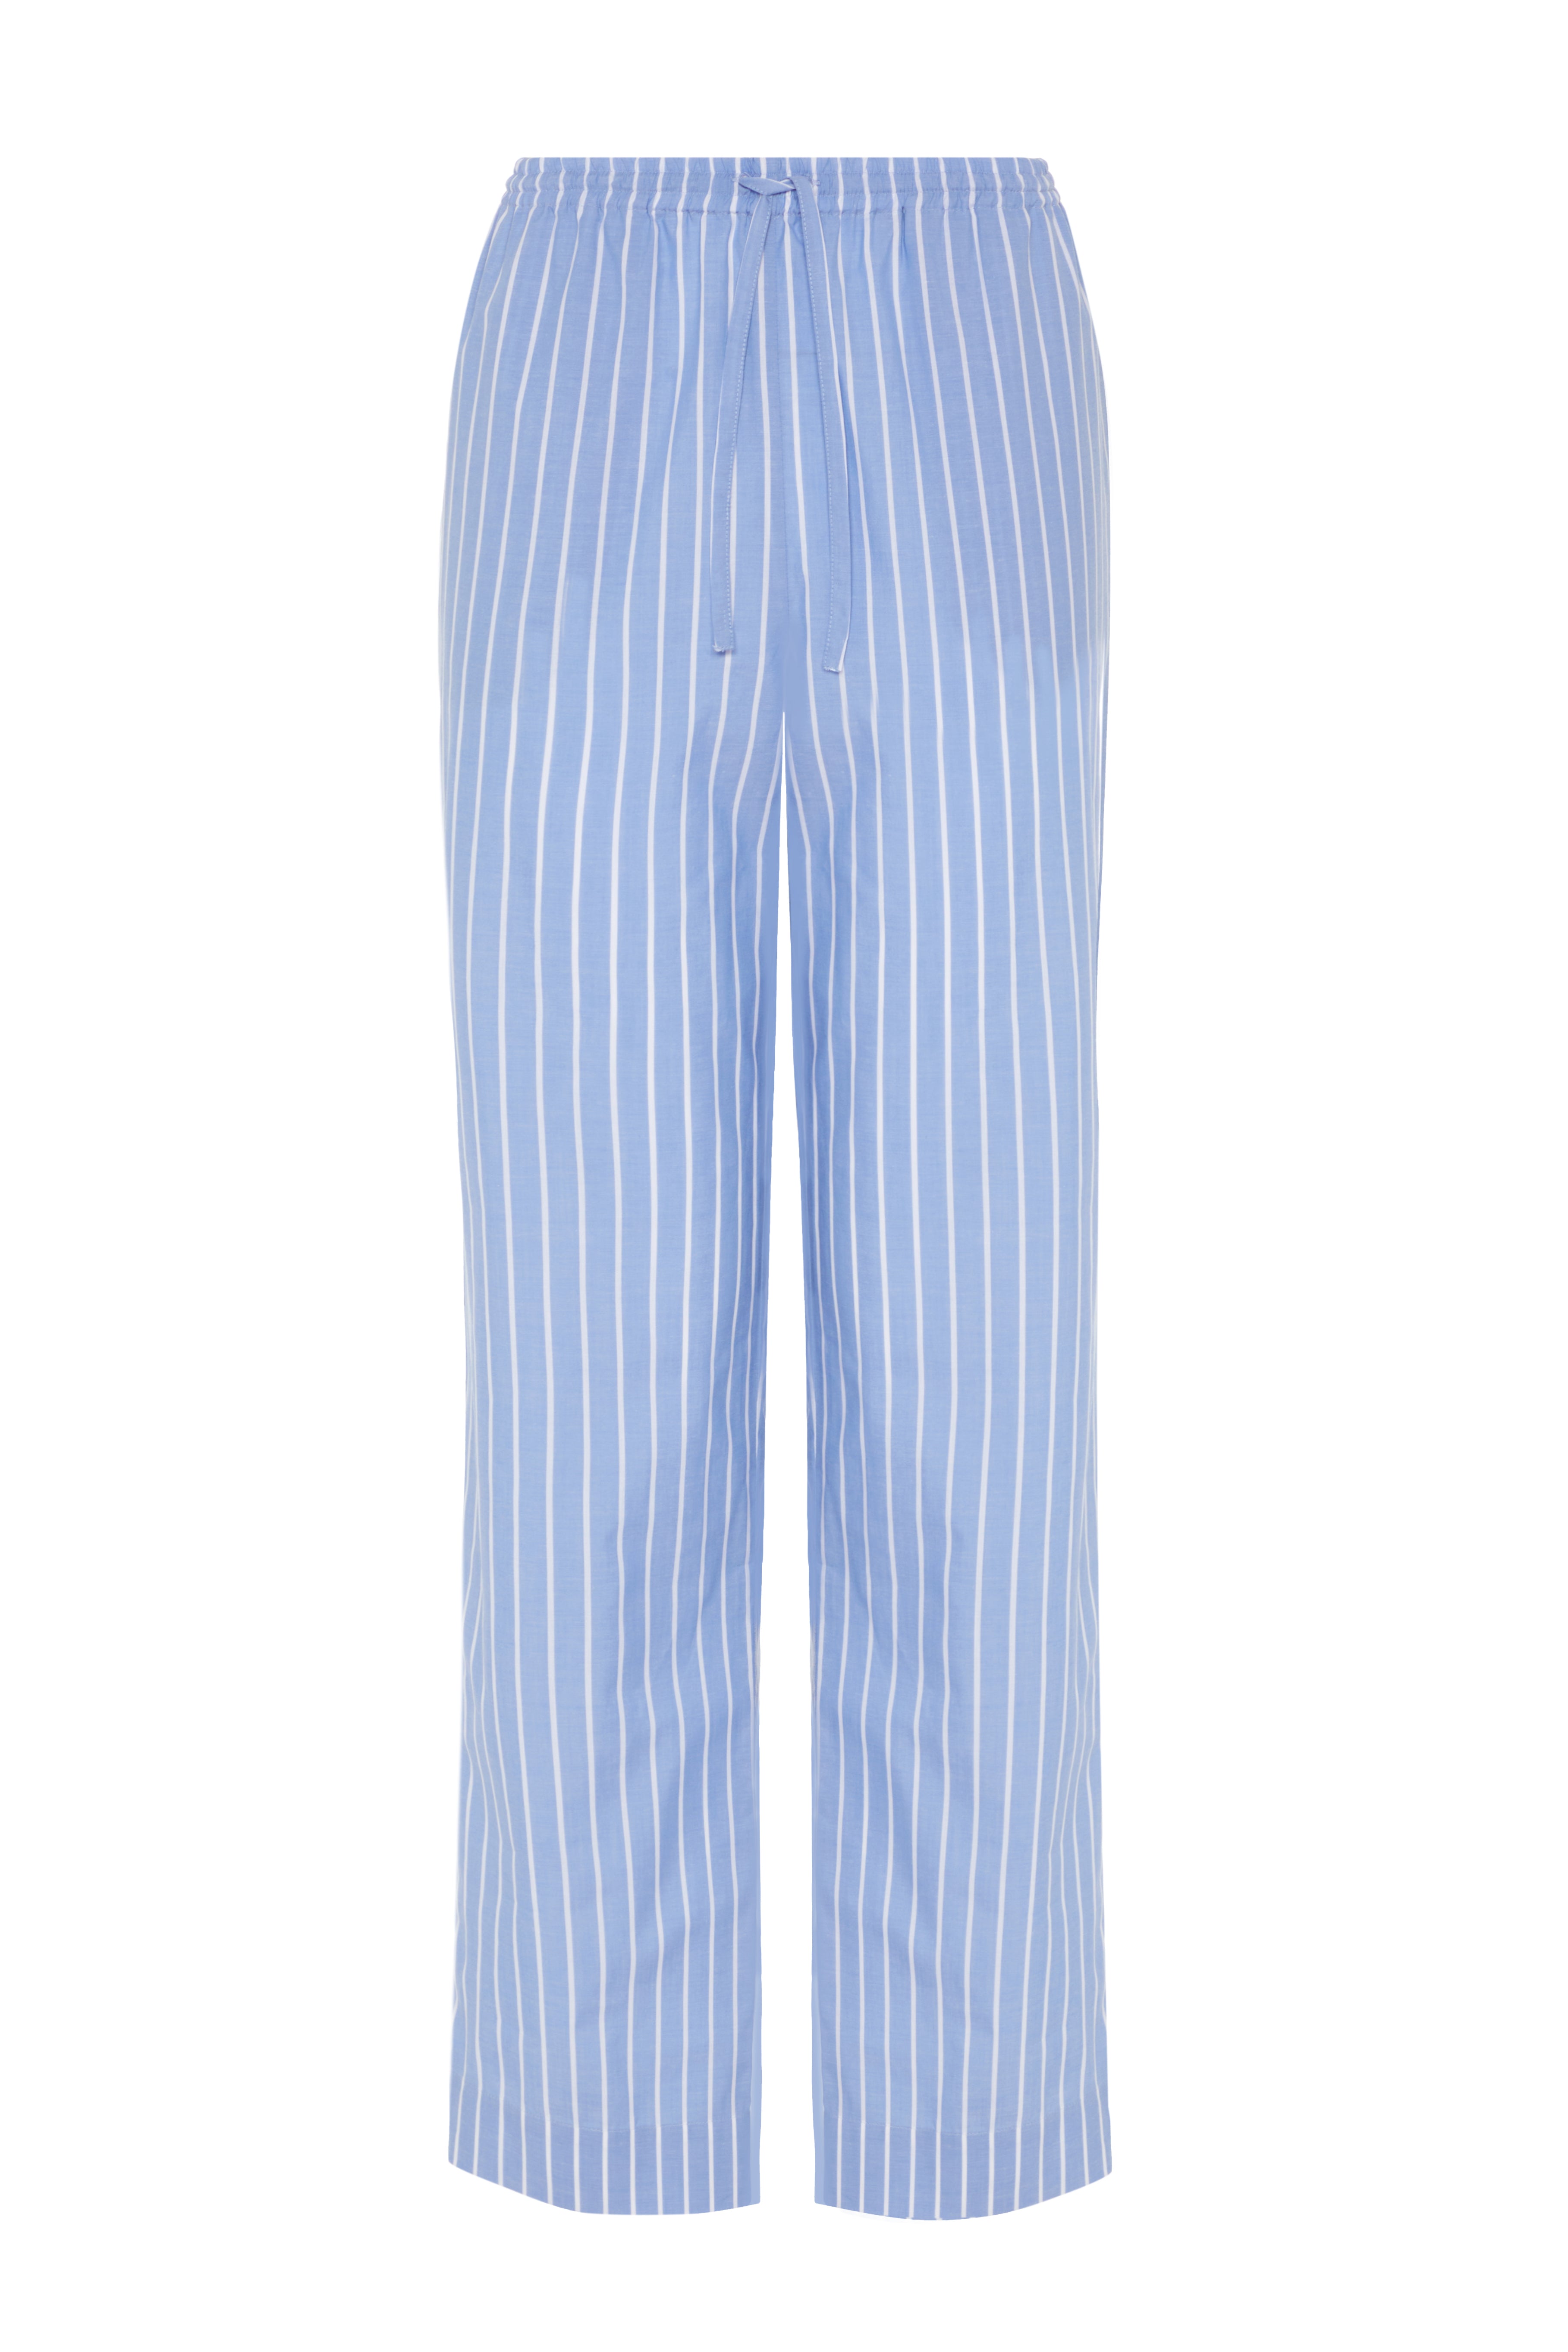 Which color top goes best with blue stripped trouser? - Quora